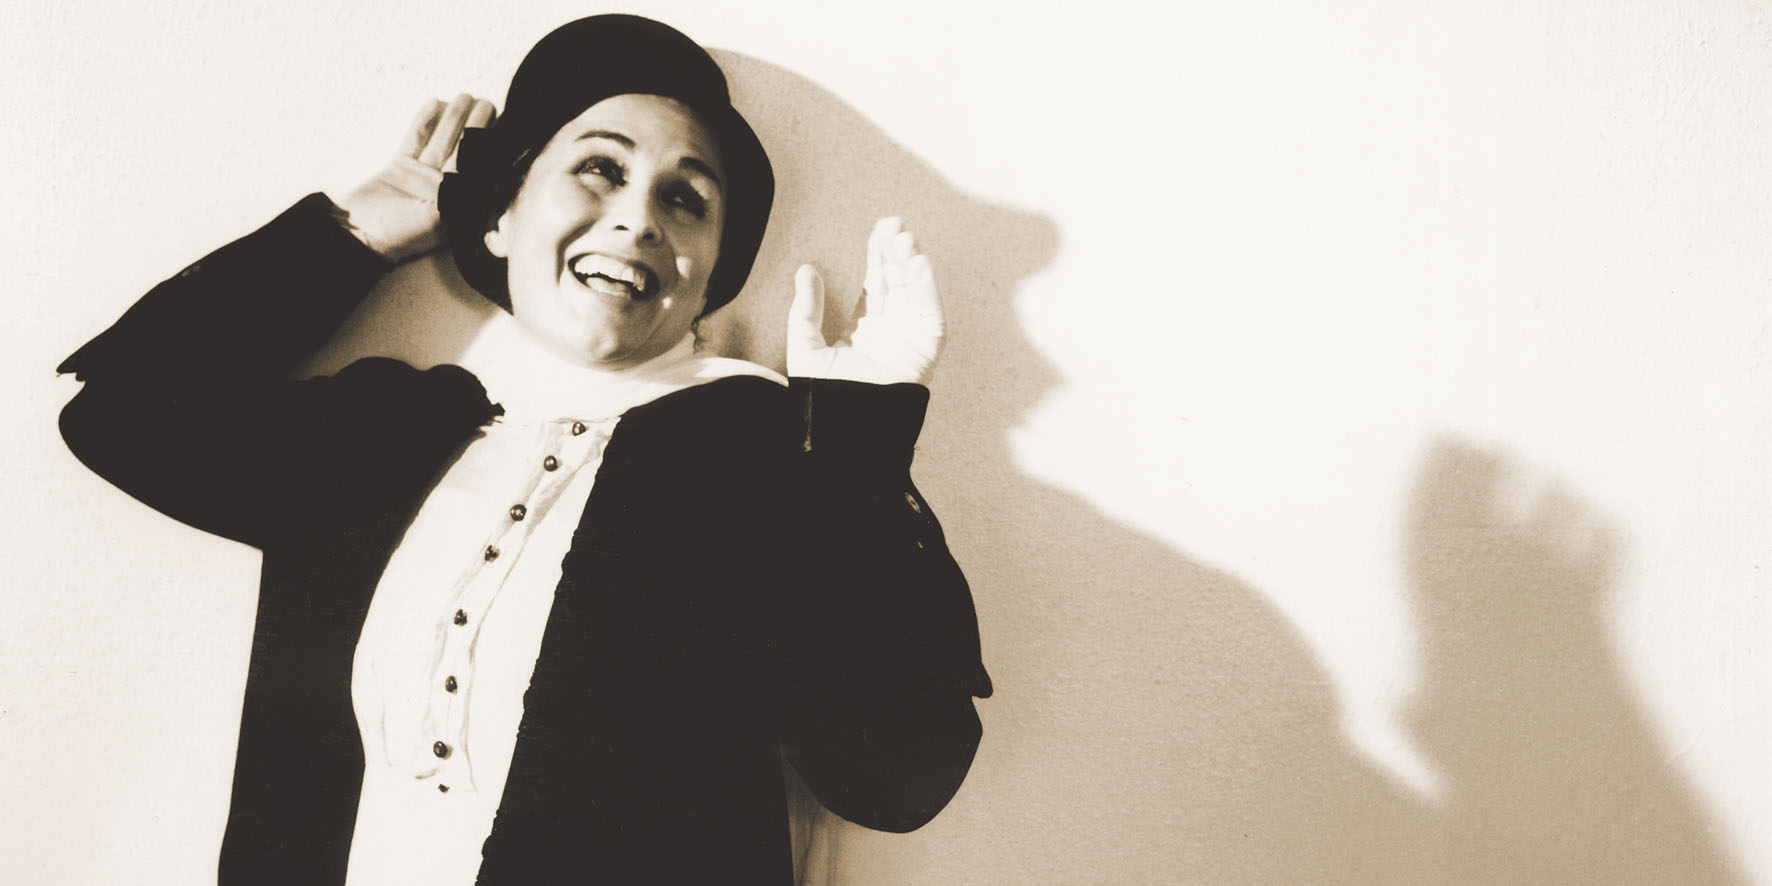 A woman dressed in a white blouse and black top hat smiling with her arms raised against a white background.